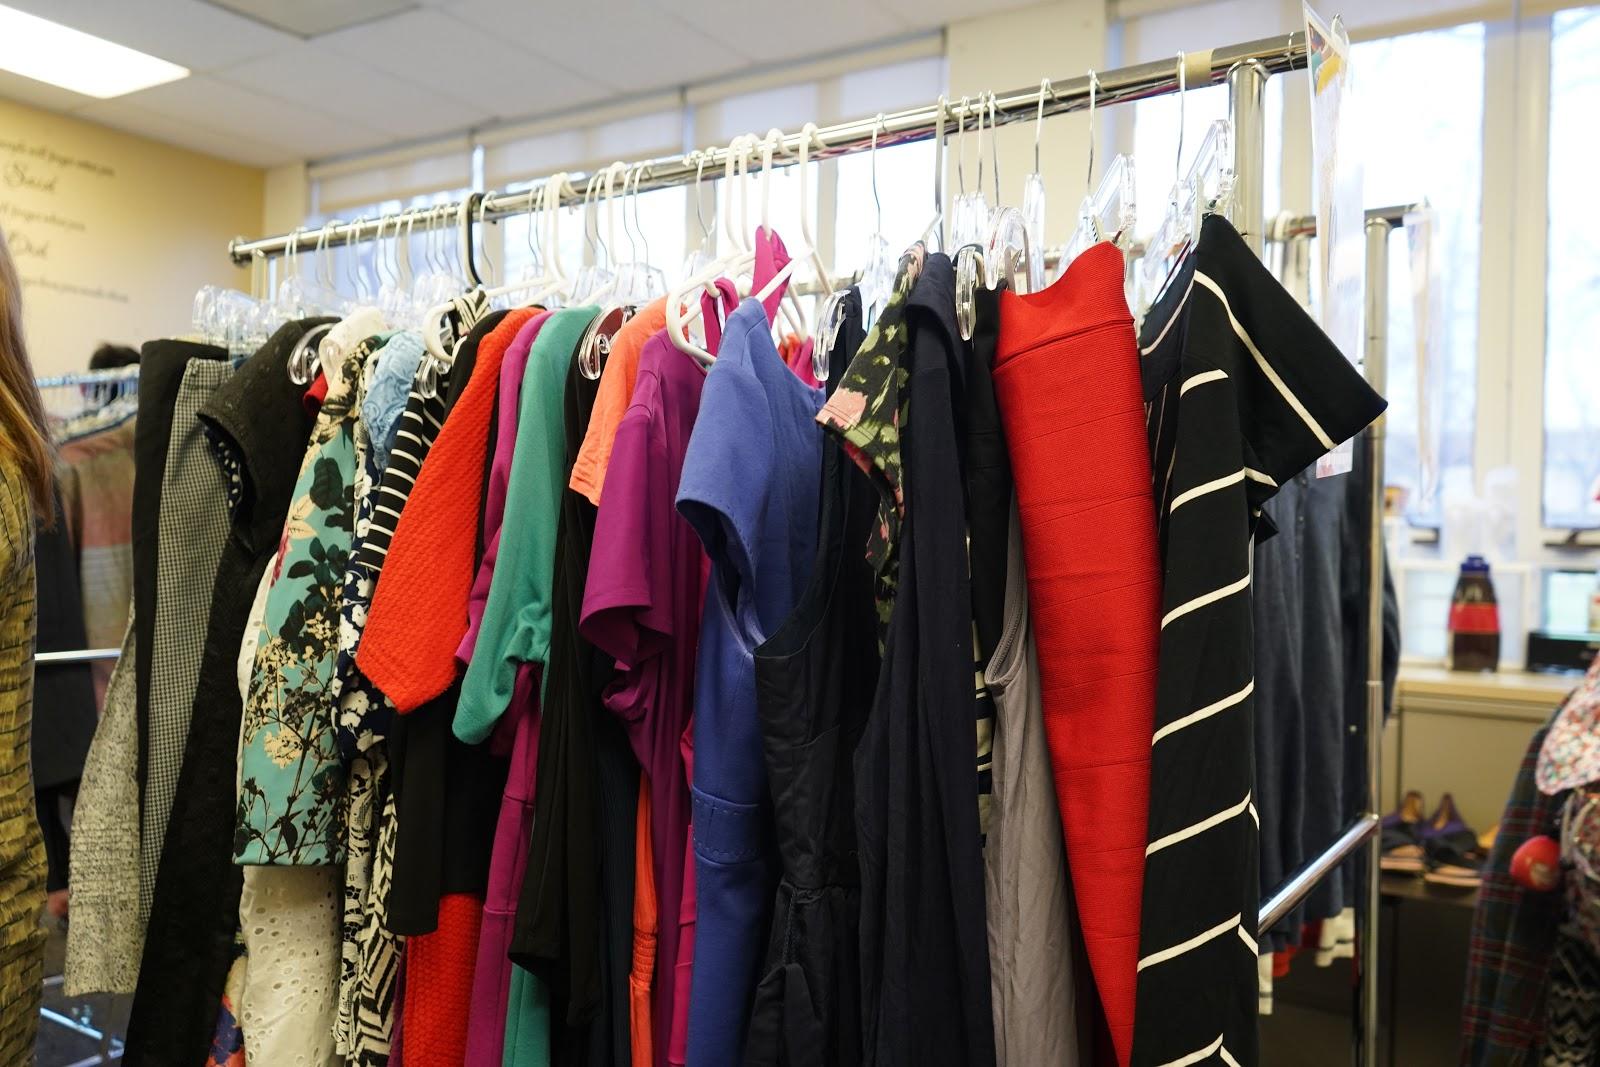 Fresno State Q clothing closet offers a variety of free clothing, shoes and accessories for transgender and non-forming students in the Thomas Building on Thursday, March 5, 2020.
Photo by: Leticia Leal